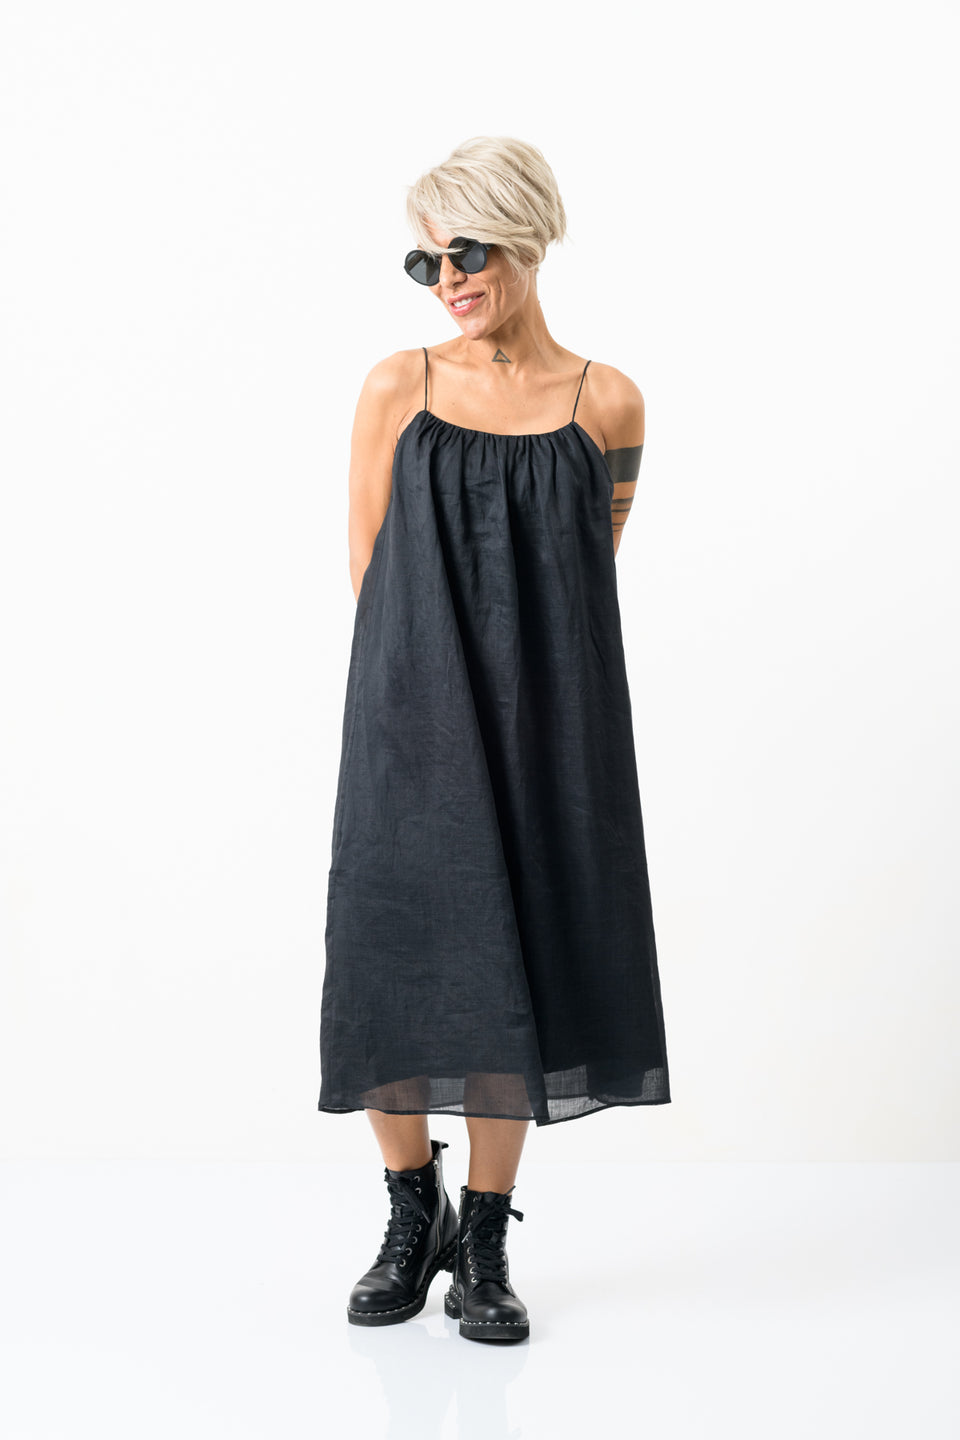 Relaxed Midi Black Dress – Clothes By Locker Room